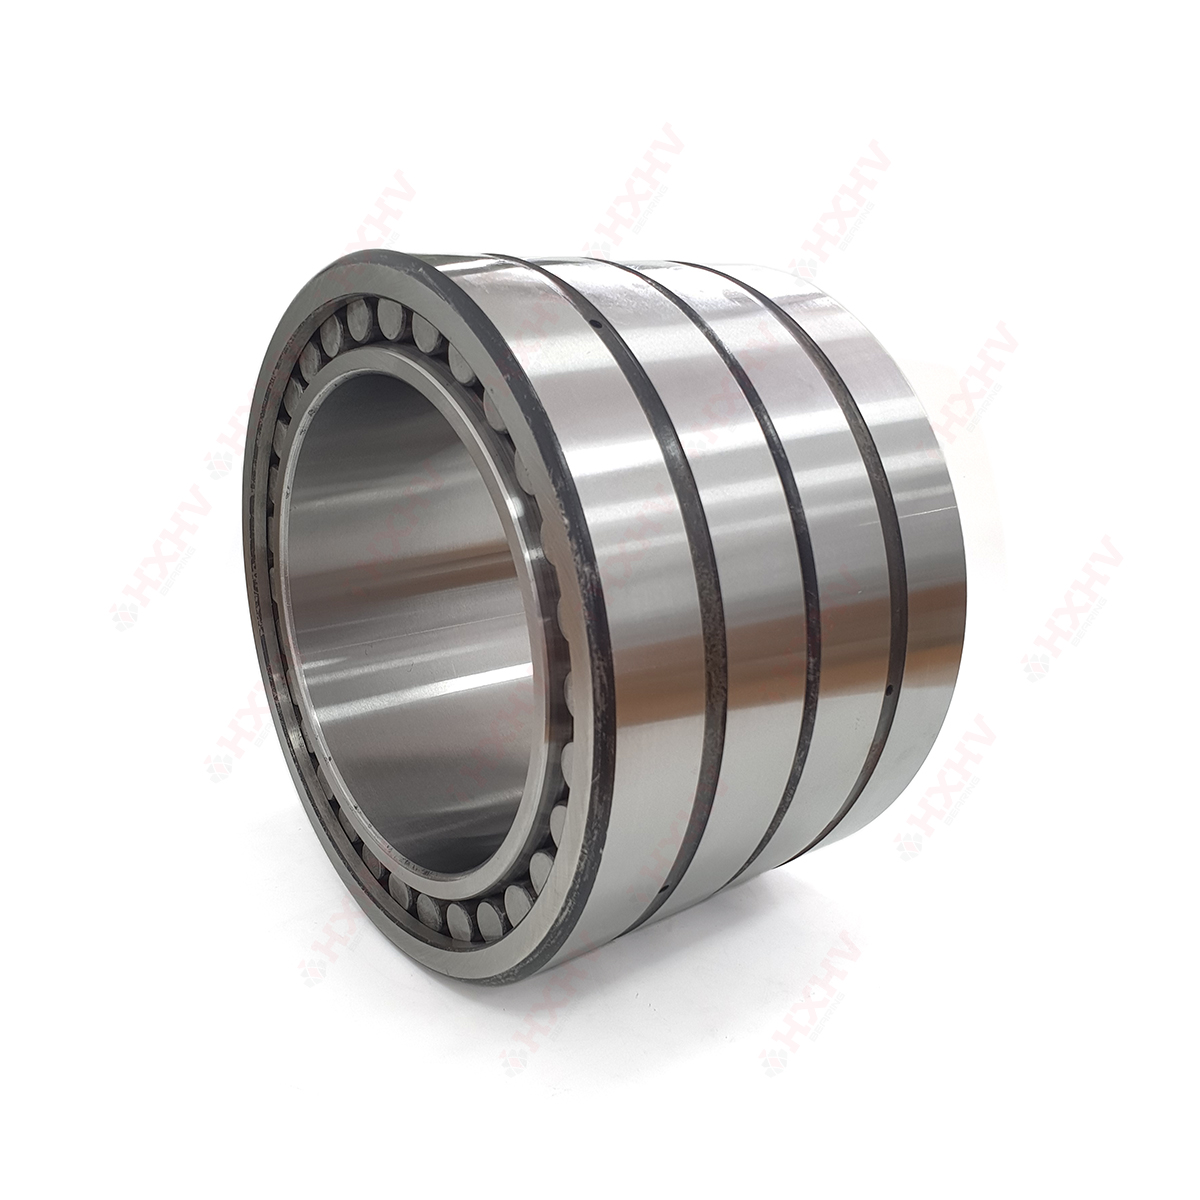 Customized FC3652168 HXHV double row cylindrical roller bearing with size 180x260x168mm (4)